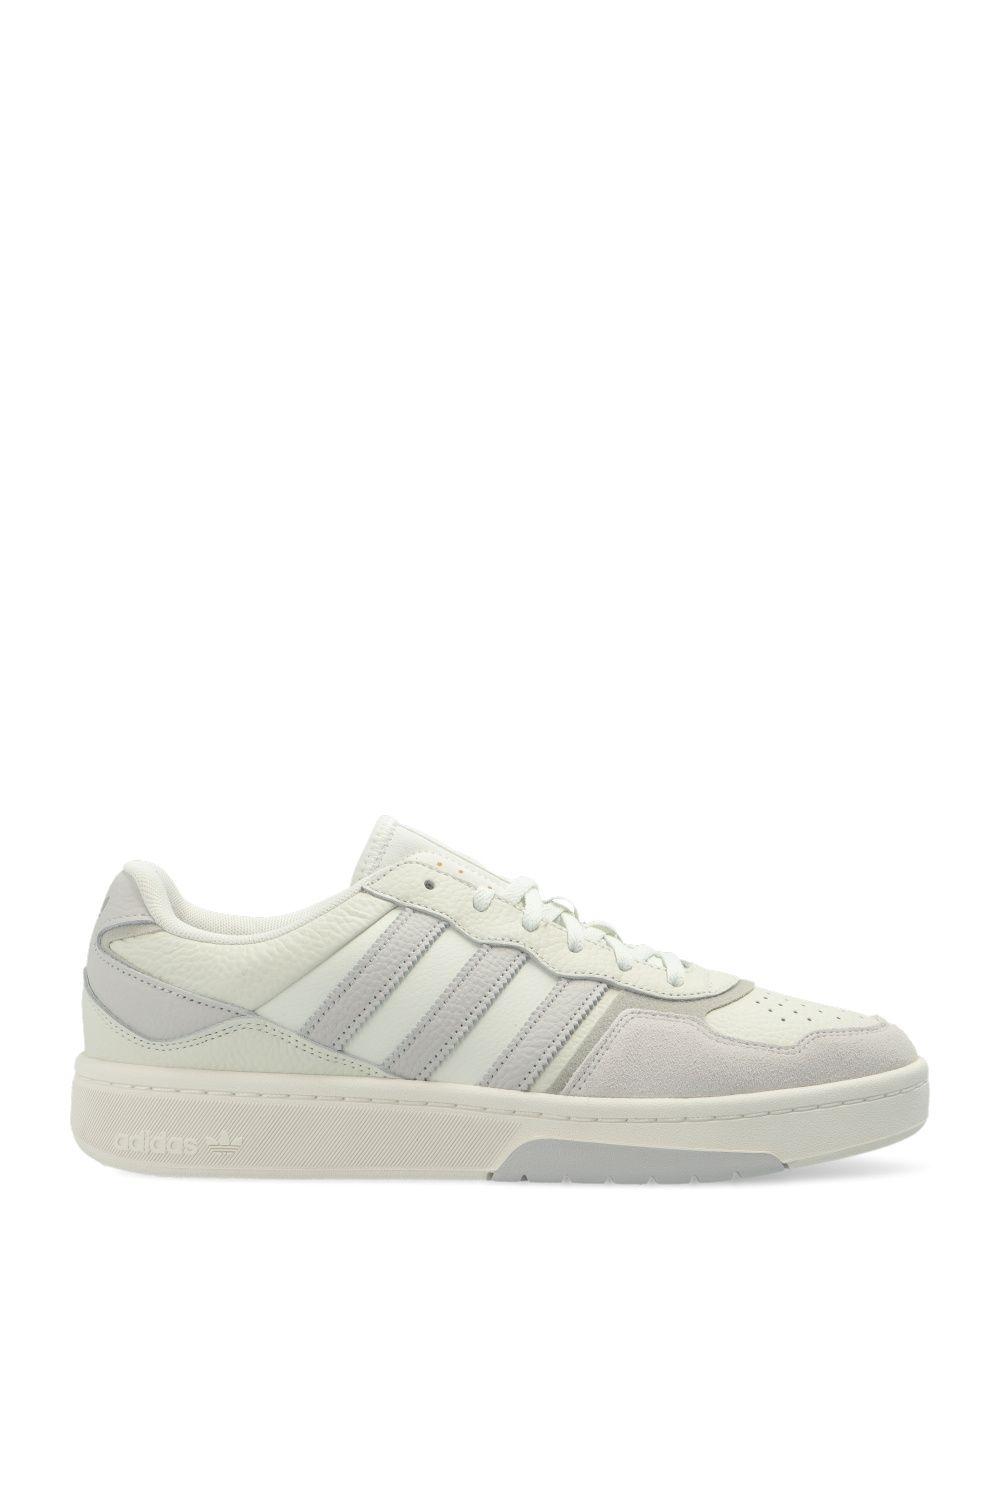 adidas Originals 'courtic' Sneakers in Gray for Men | Lyst